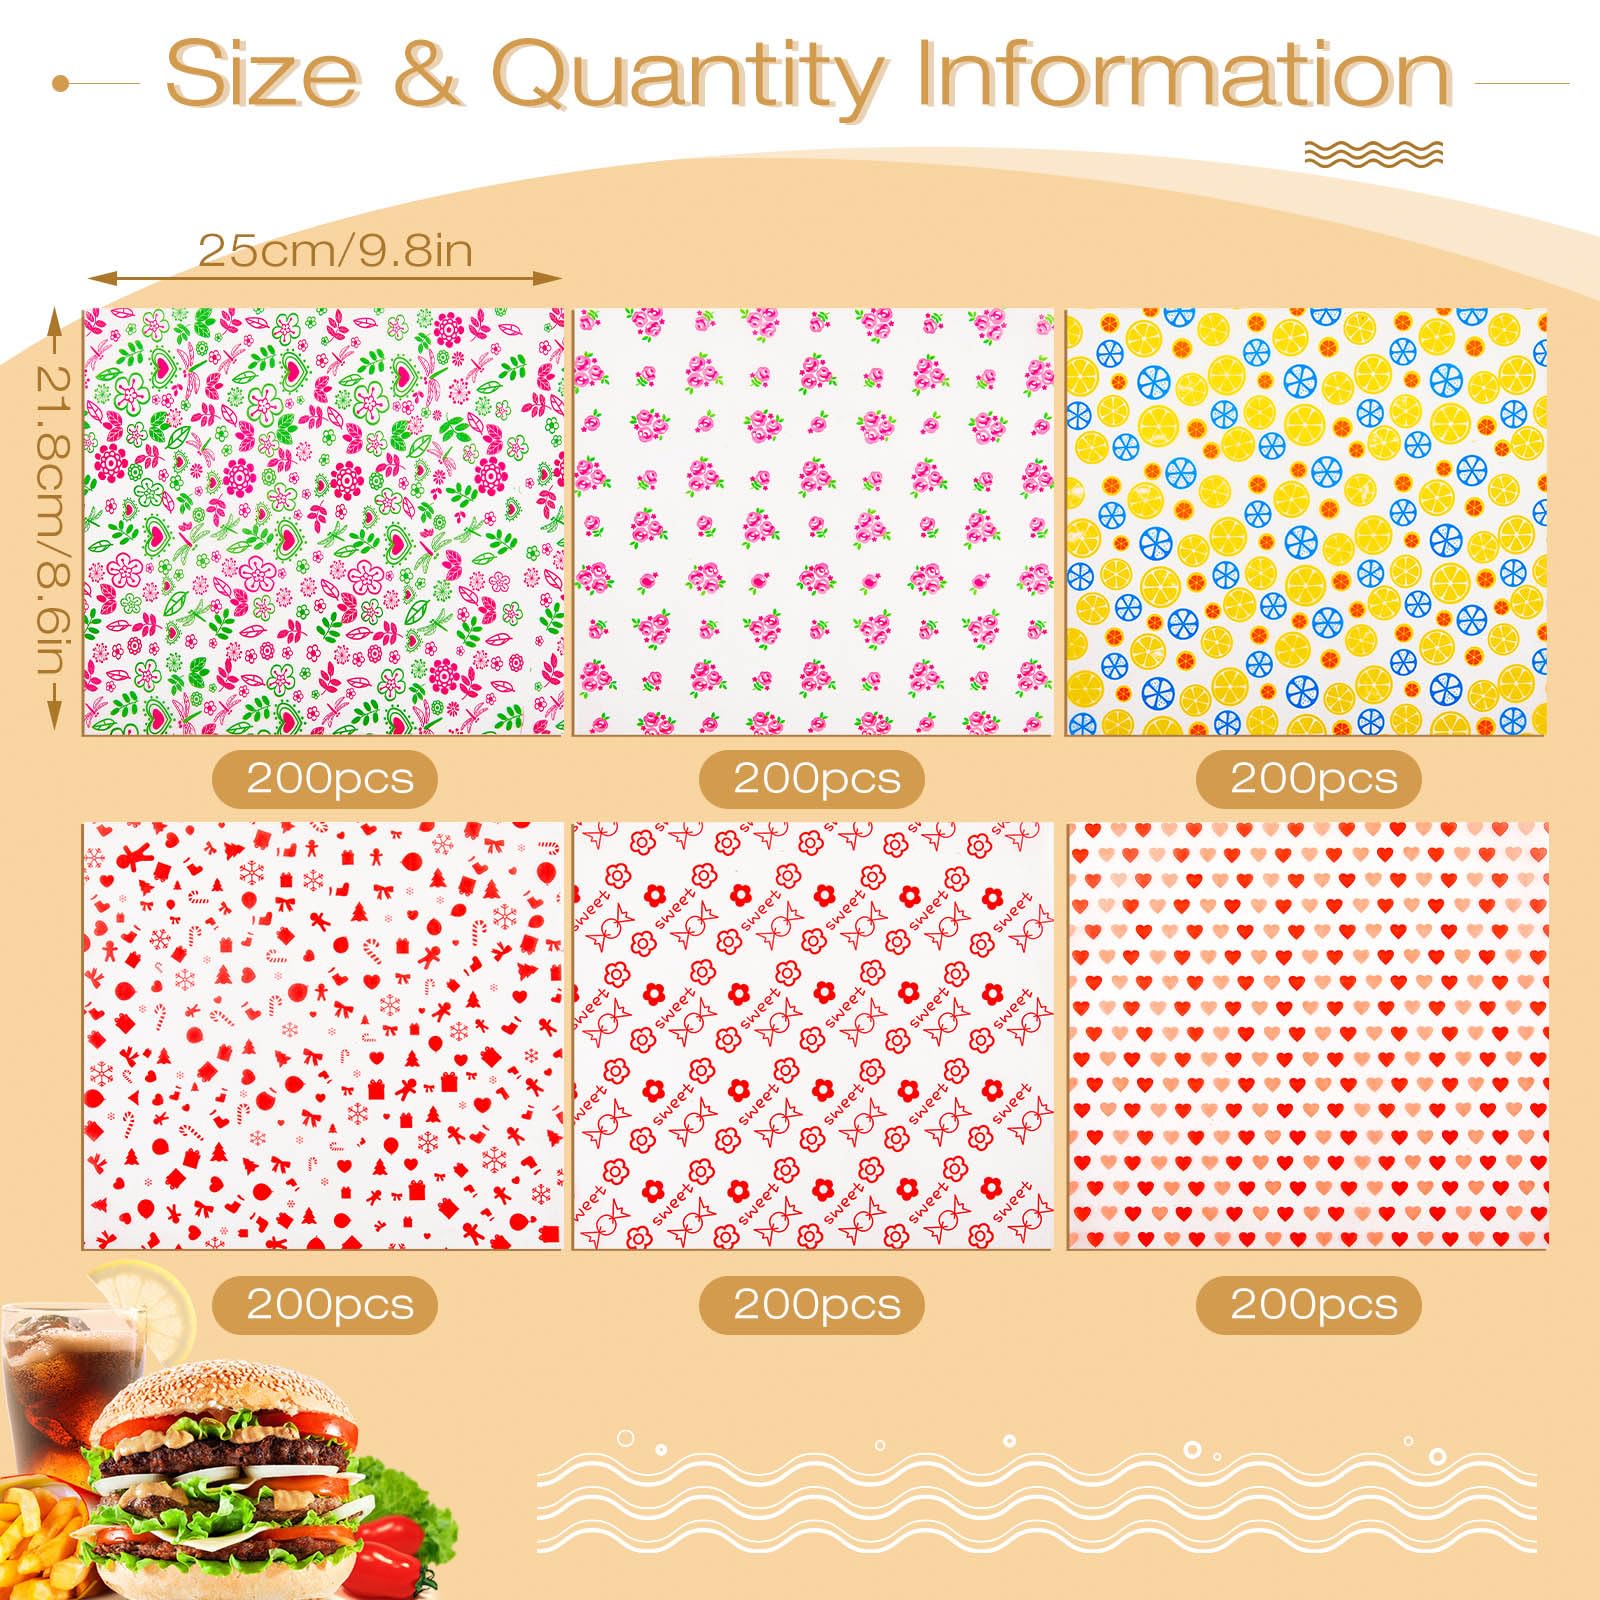 Glenmal 9.8x8.5 Inch Wax Paper Sheets Greaseproof Waterproof Dry Waxed Paper Sheets Floral Lemon Sandwich Wrap Paper Liner Burger Bread Food Basket Liners for Home Picnic Kitchen Party(600 Pcs)